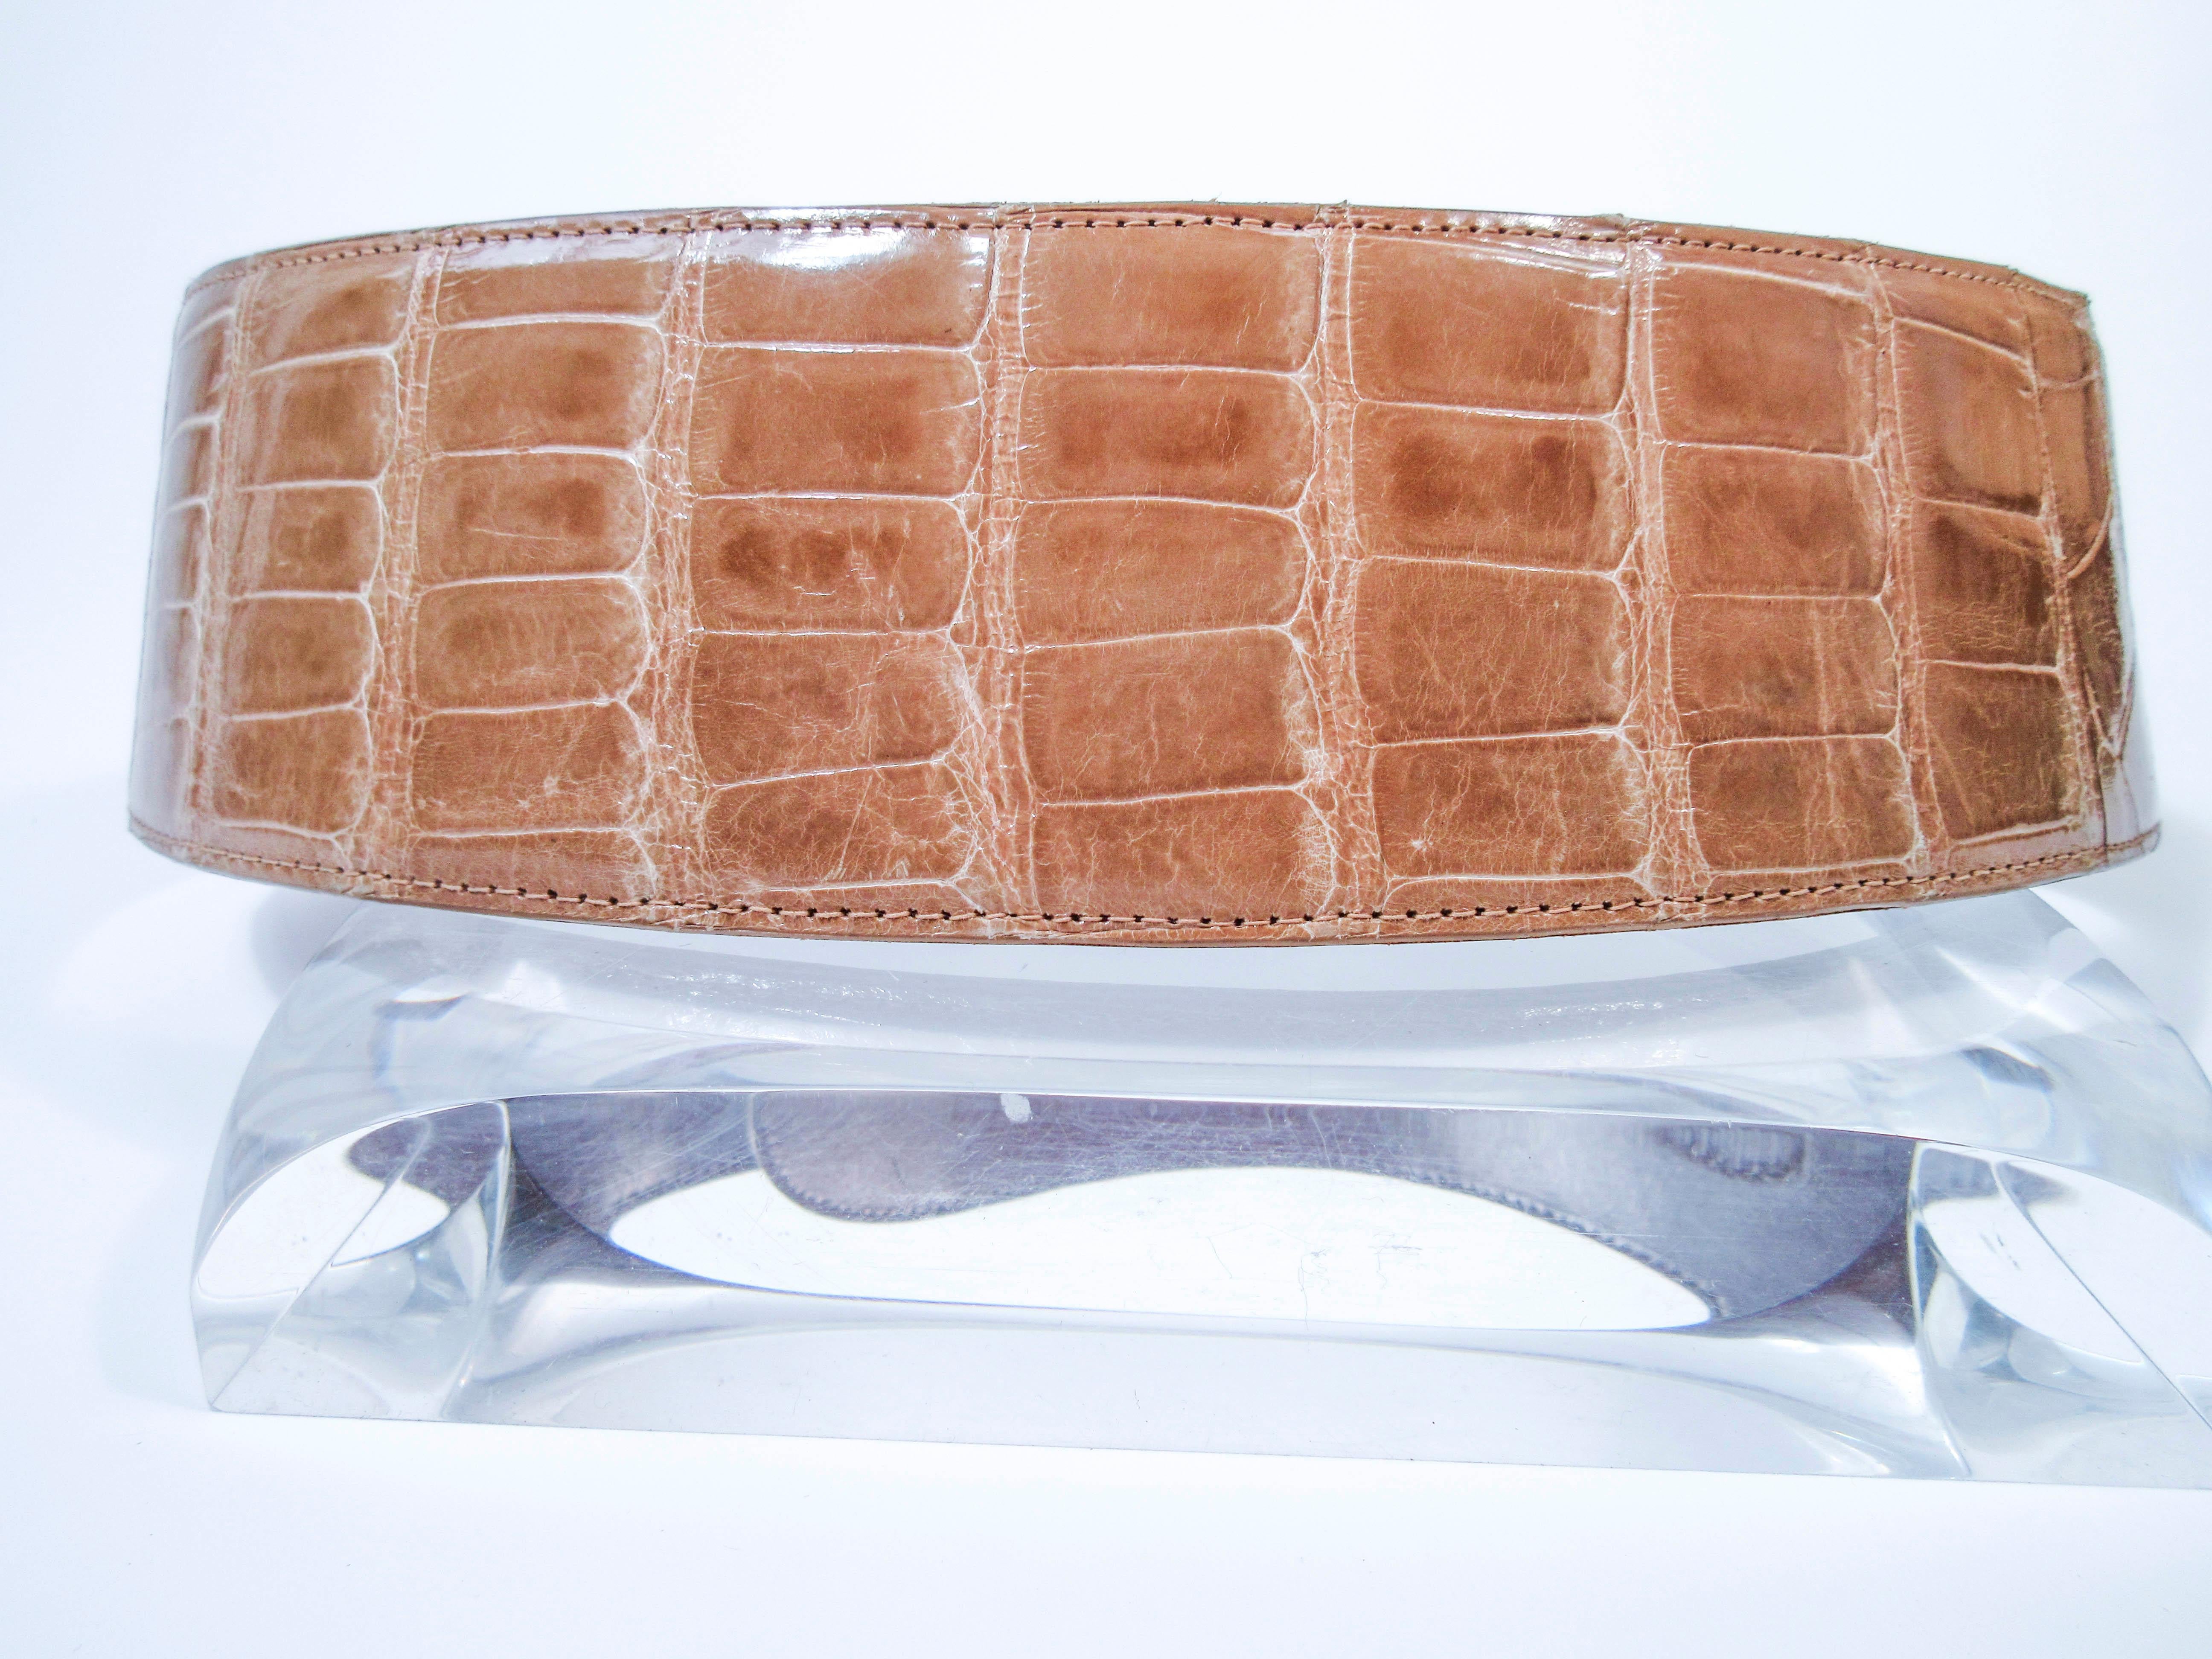 BARRY KISELSTEIN-CORD Nude Alligator Belt Goldtone Sterling Frog Buckle Large In Excellent Condition For Sale In Los Angeles, CA